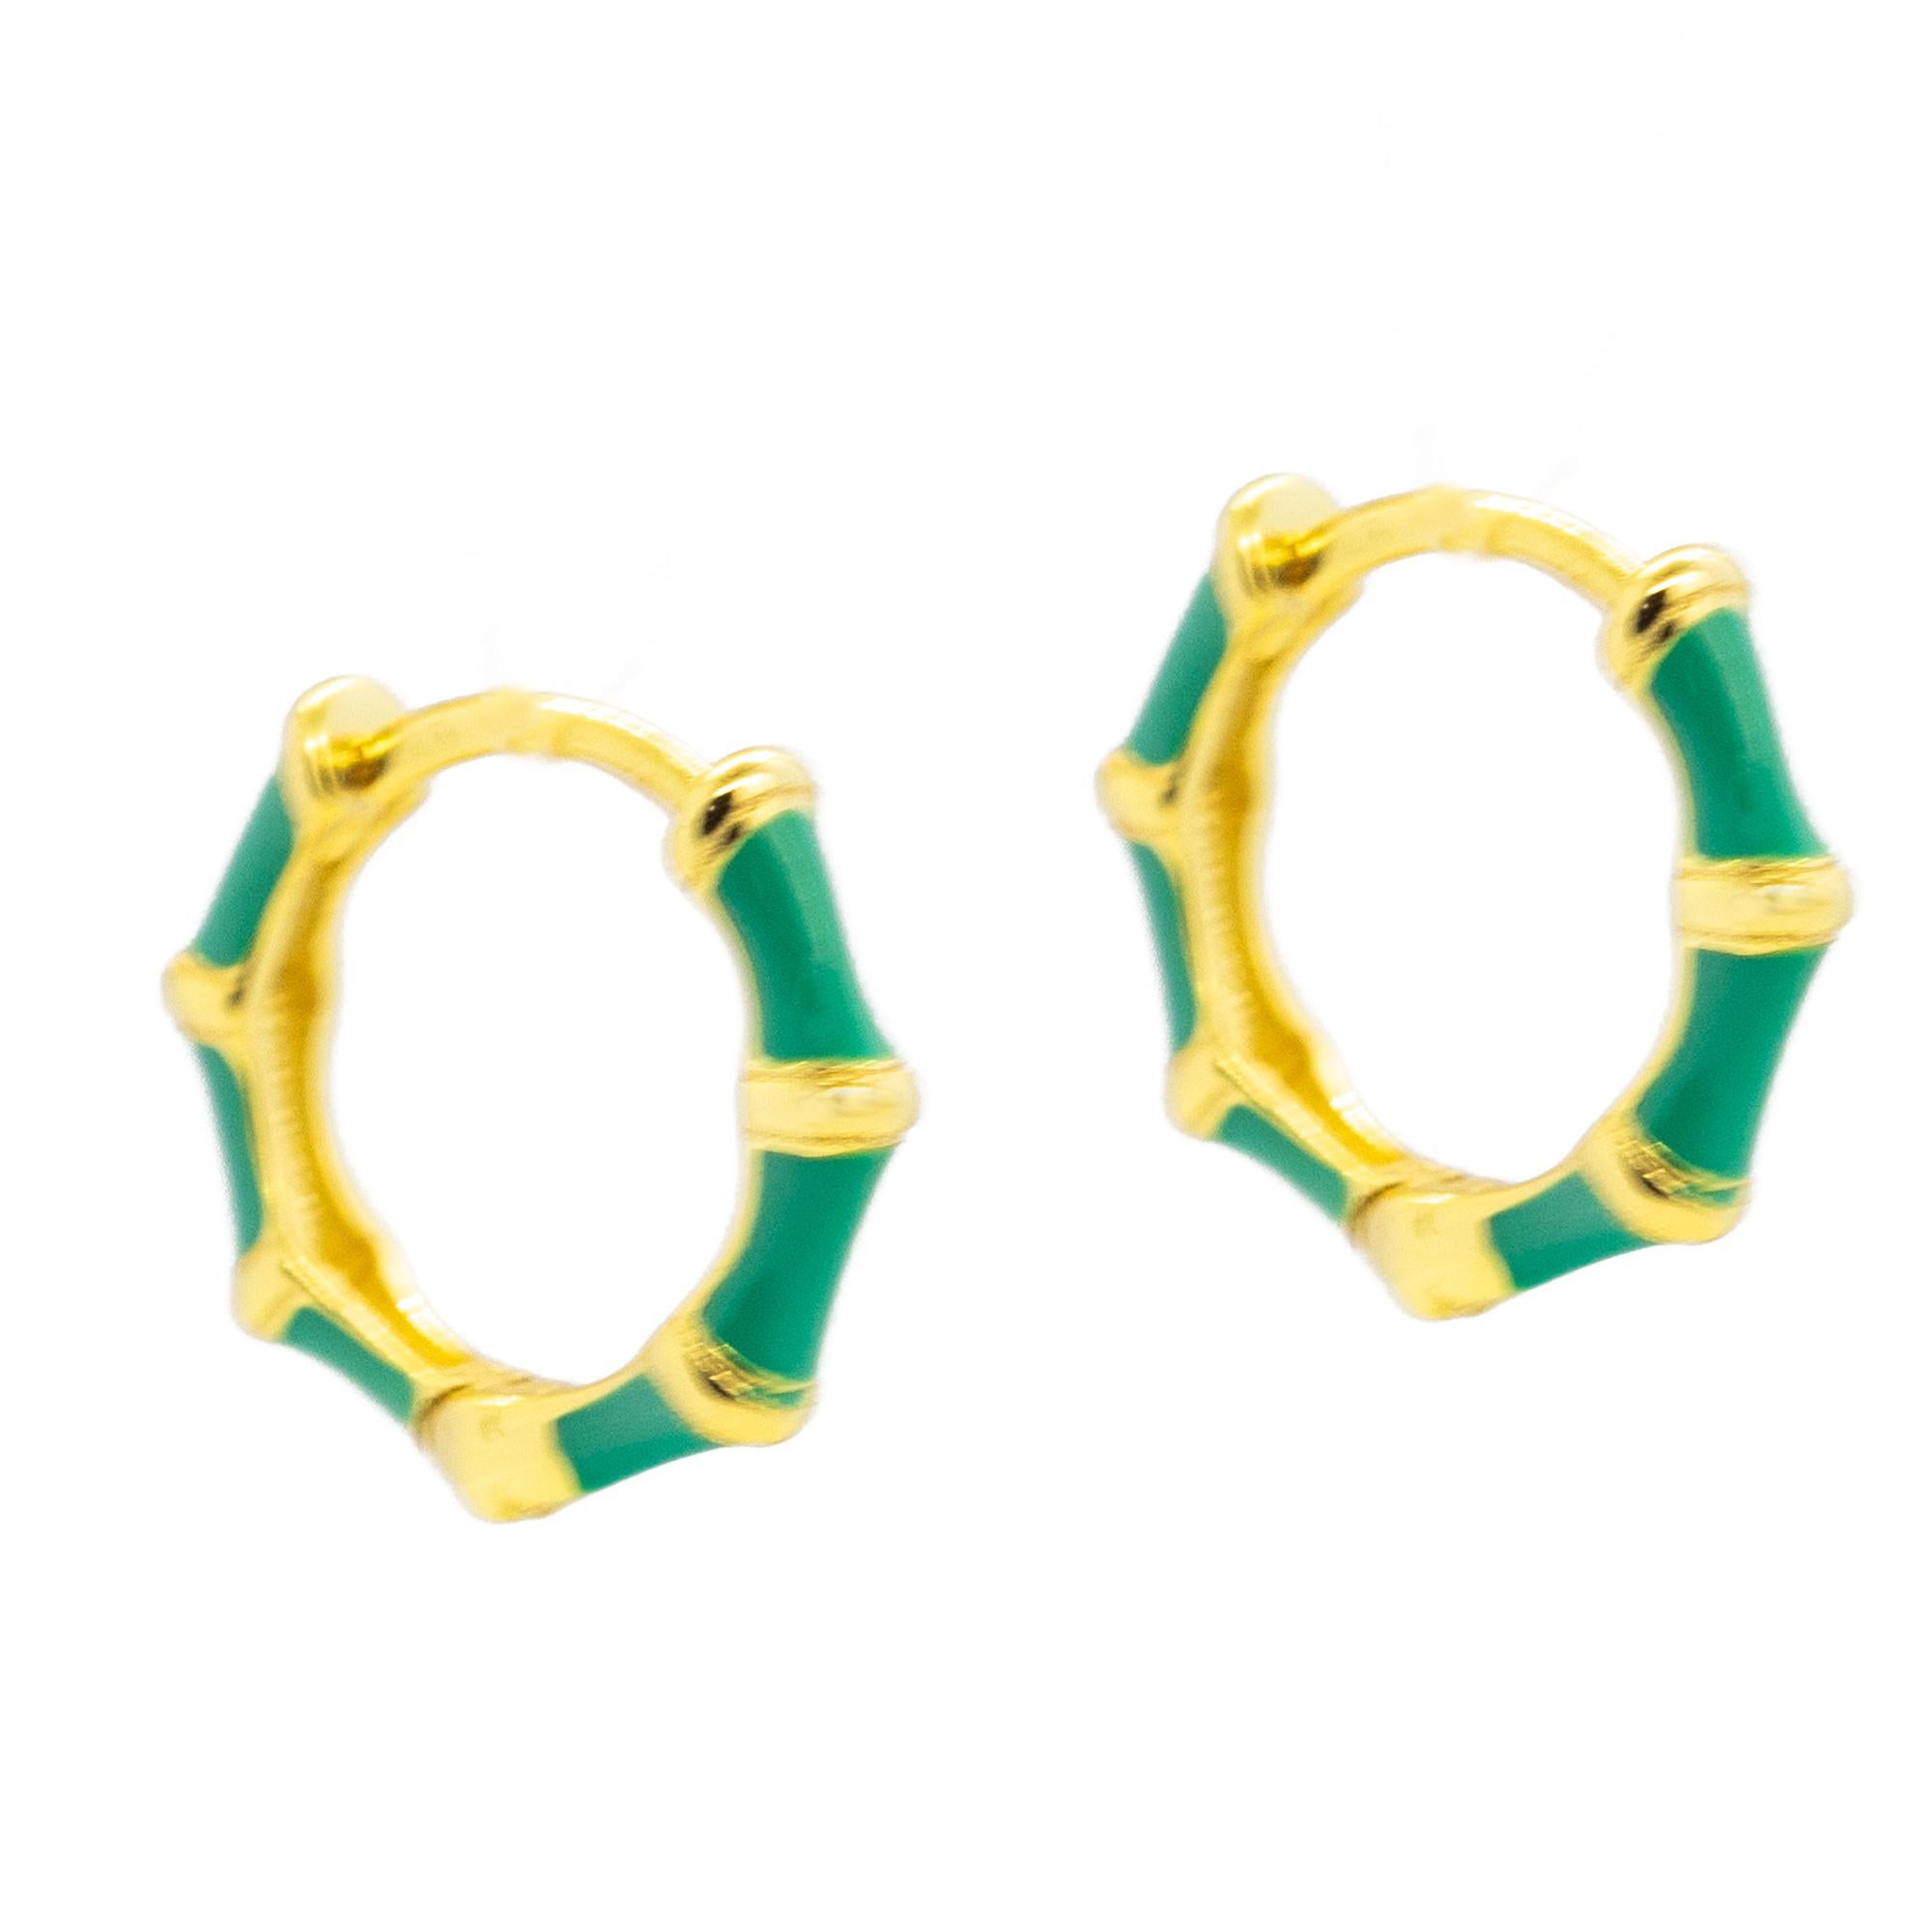 Elegant and Chic gold round hoop earrings, on a gold plated mounting embellished with green enamel.
Delicate and light piece for an everyday stylish and minimalist outfit.

• Gold Plate
• Green enamel
• External diameter 1.3 cm, thickness 0.2 cm
•